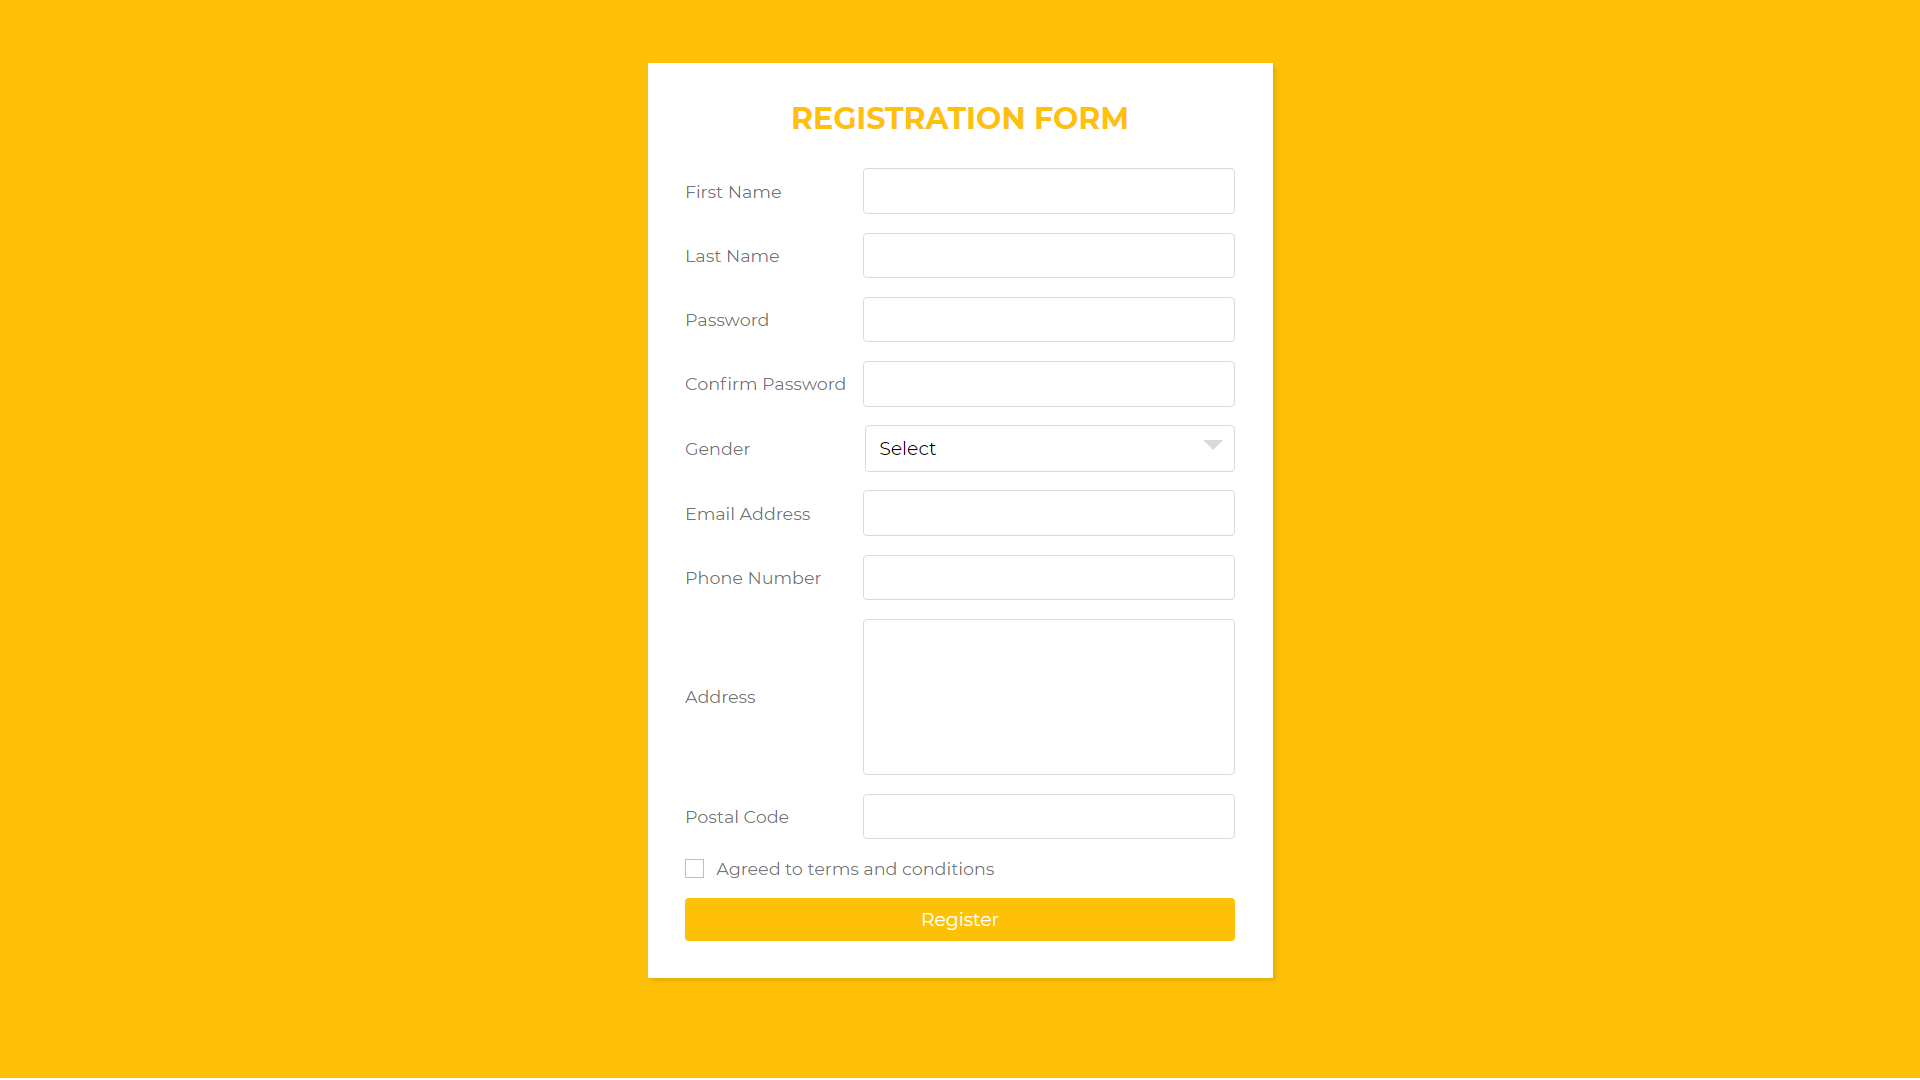 Registration Form in HTML and CSS